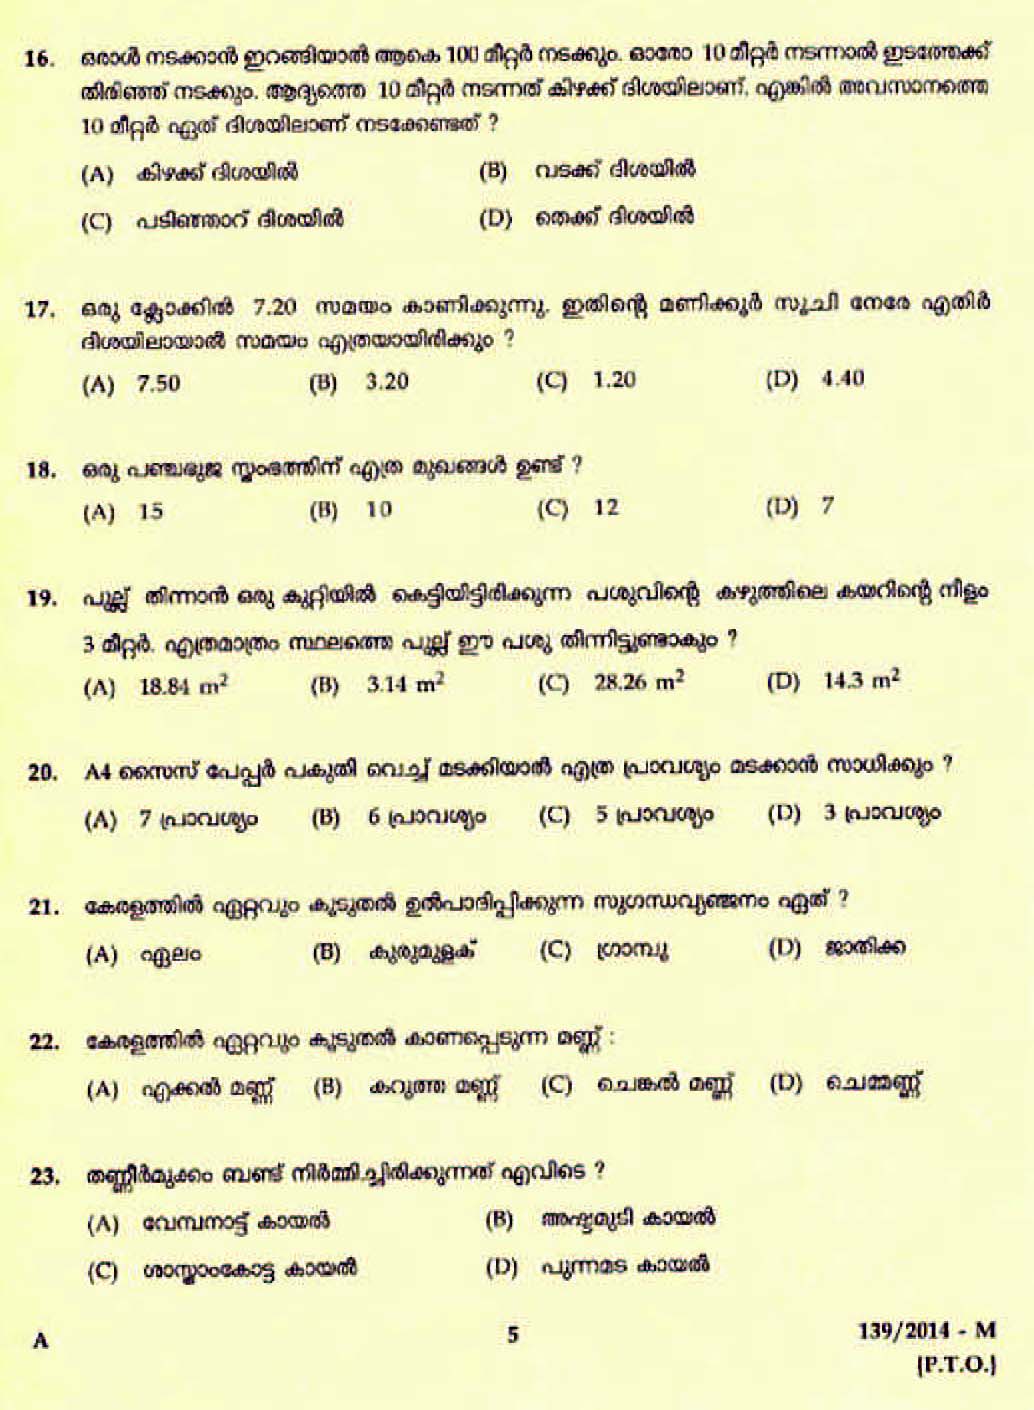 LD Clerk Various Question Paper Malayalam 2014 Paper Code 1392014 M 3